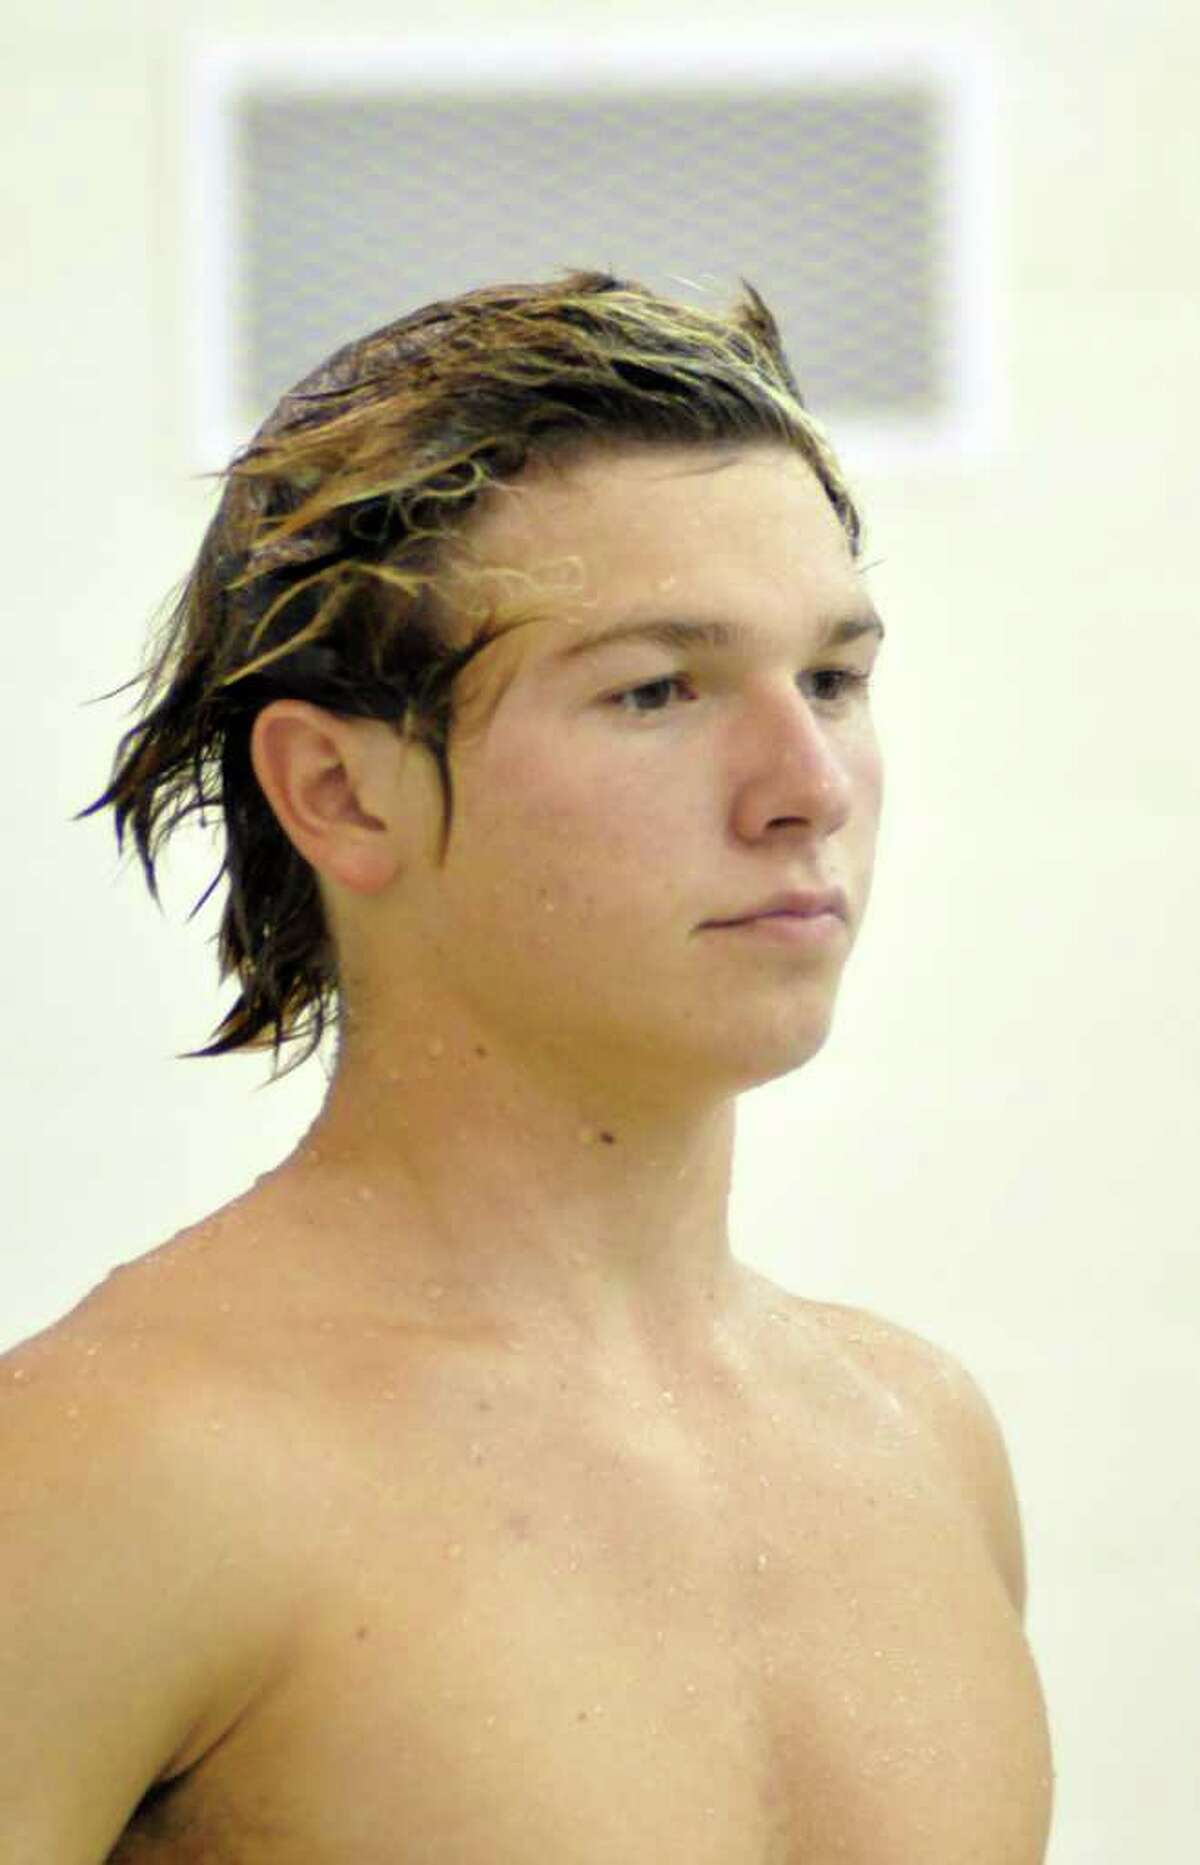 Greenwich's Joey Tambascio during waterpolo practice at Greenwich High School on Thursday, Sept. 8, 2011.